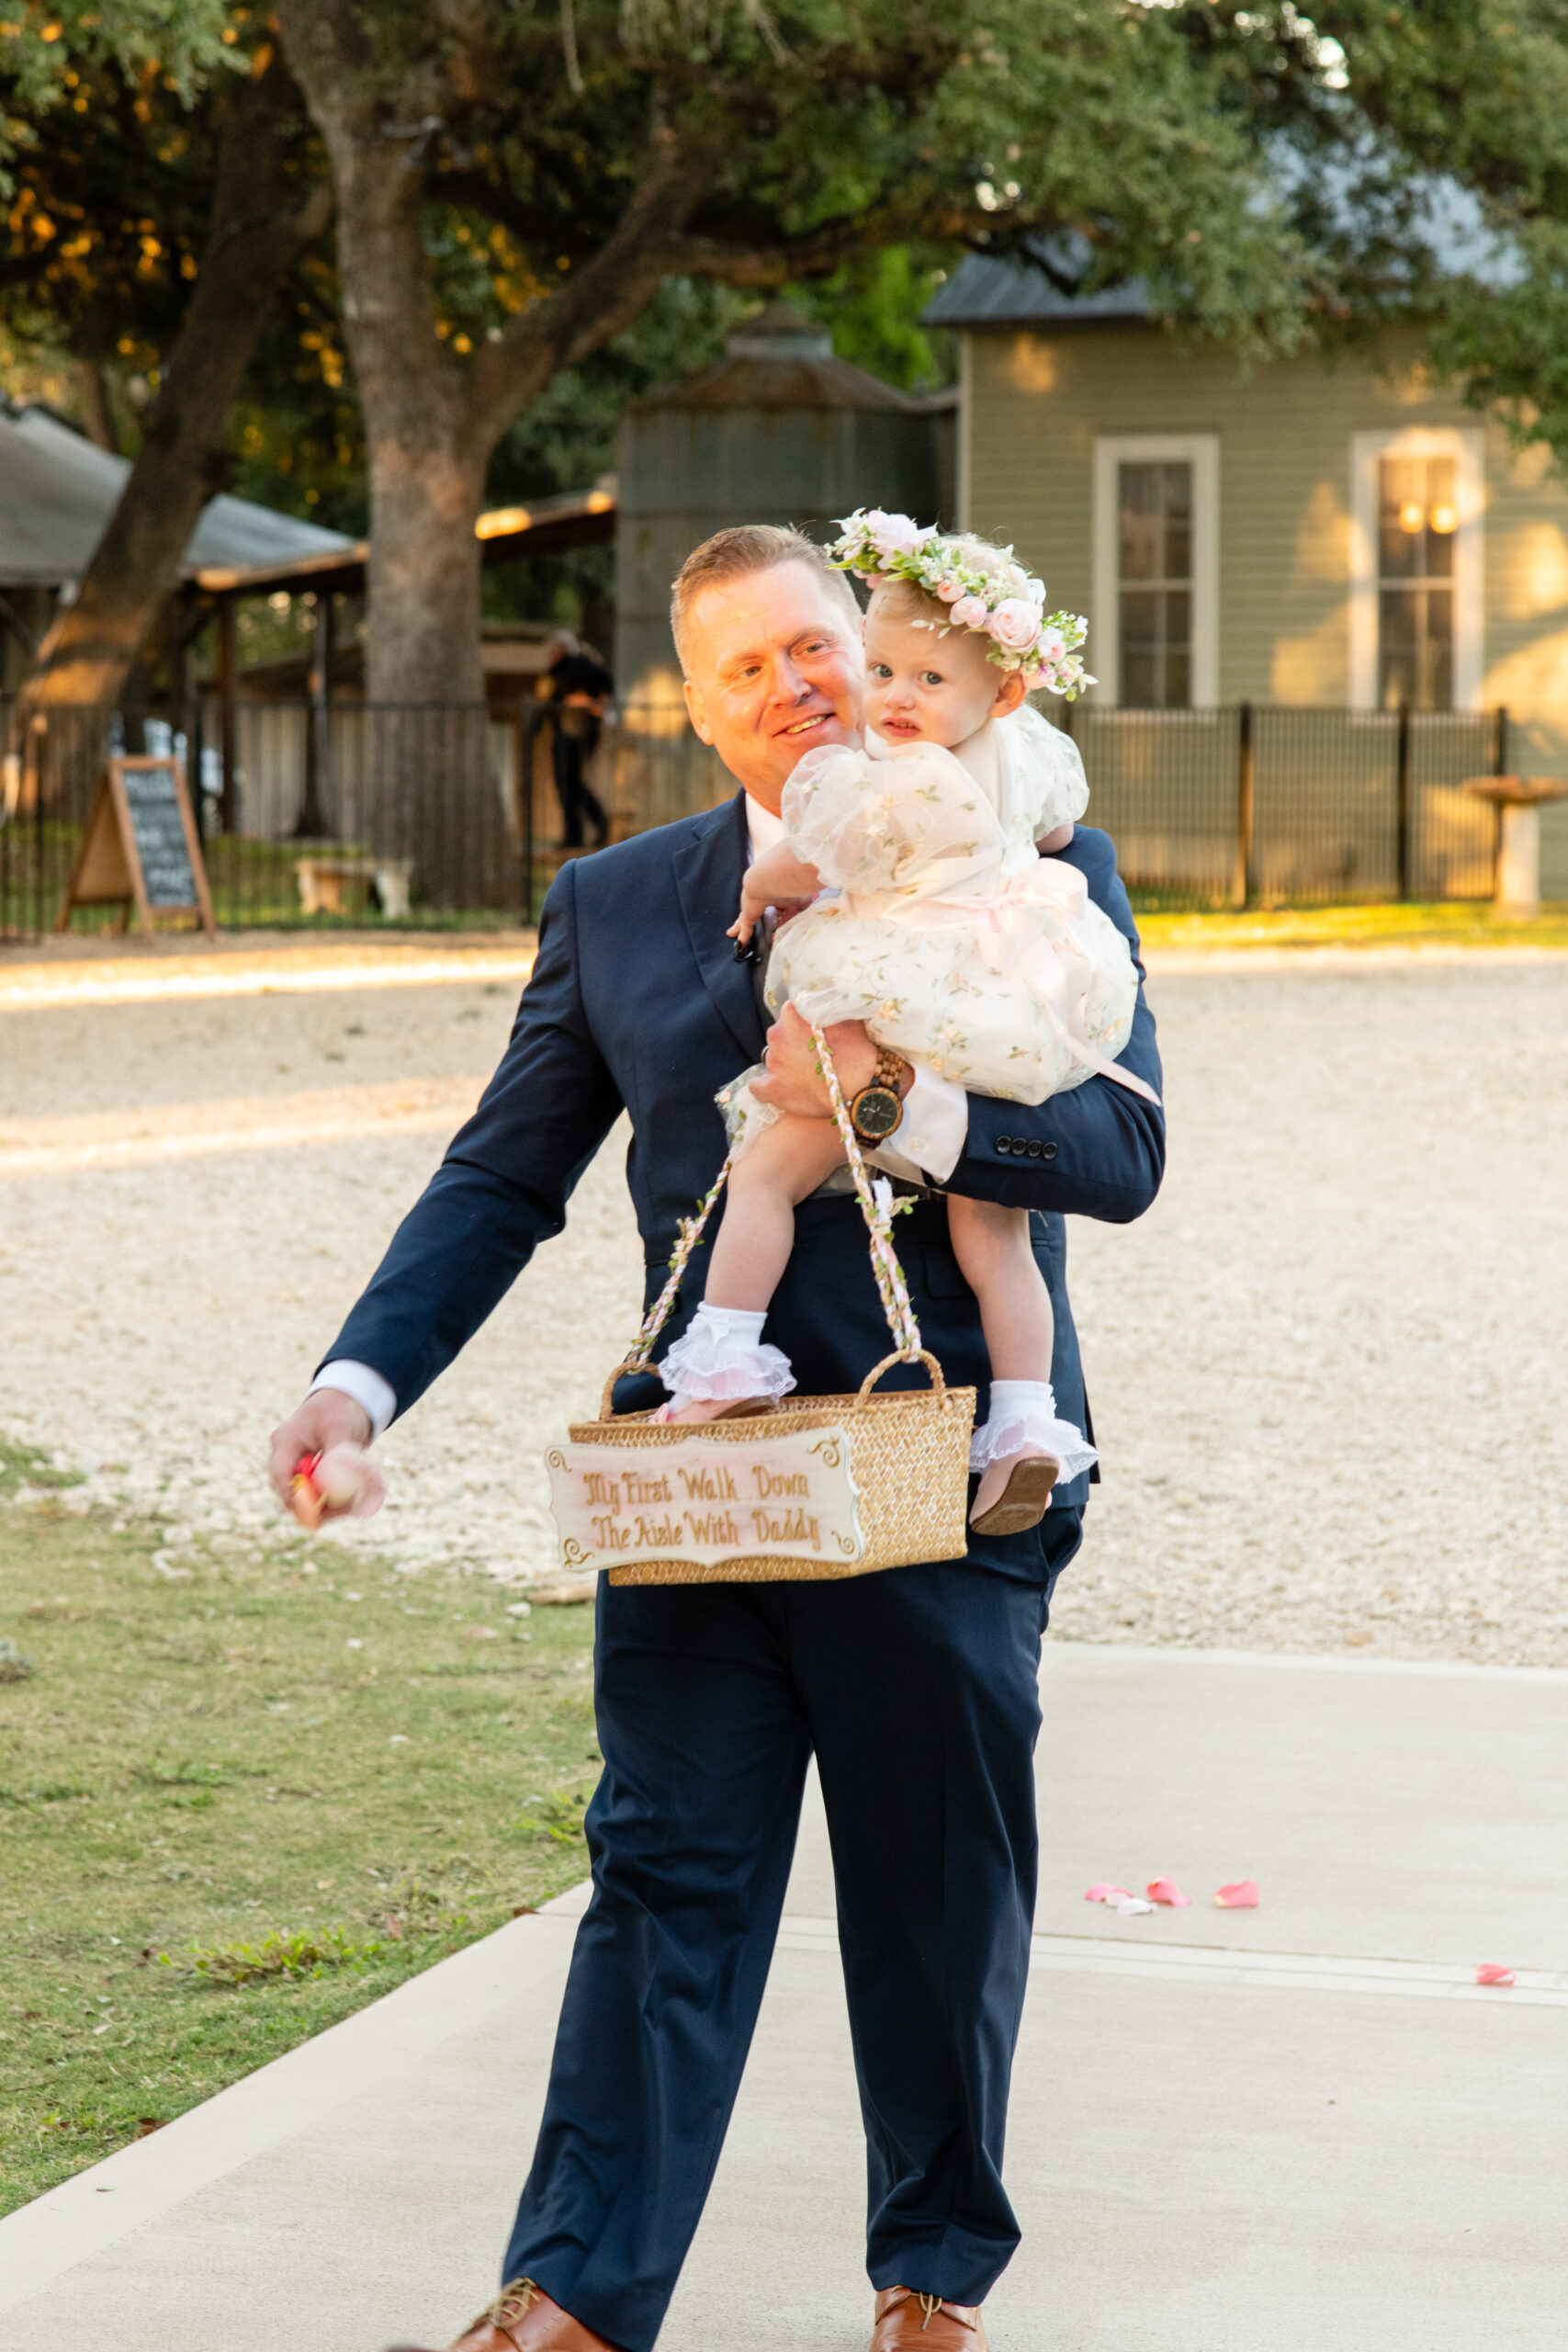 groom and flower girl wedding photo,Harper Hill Ranch, Texas Hill Country Photographer, Texas Hill Country wedding photographer